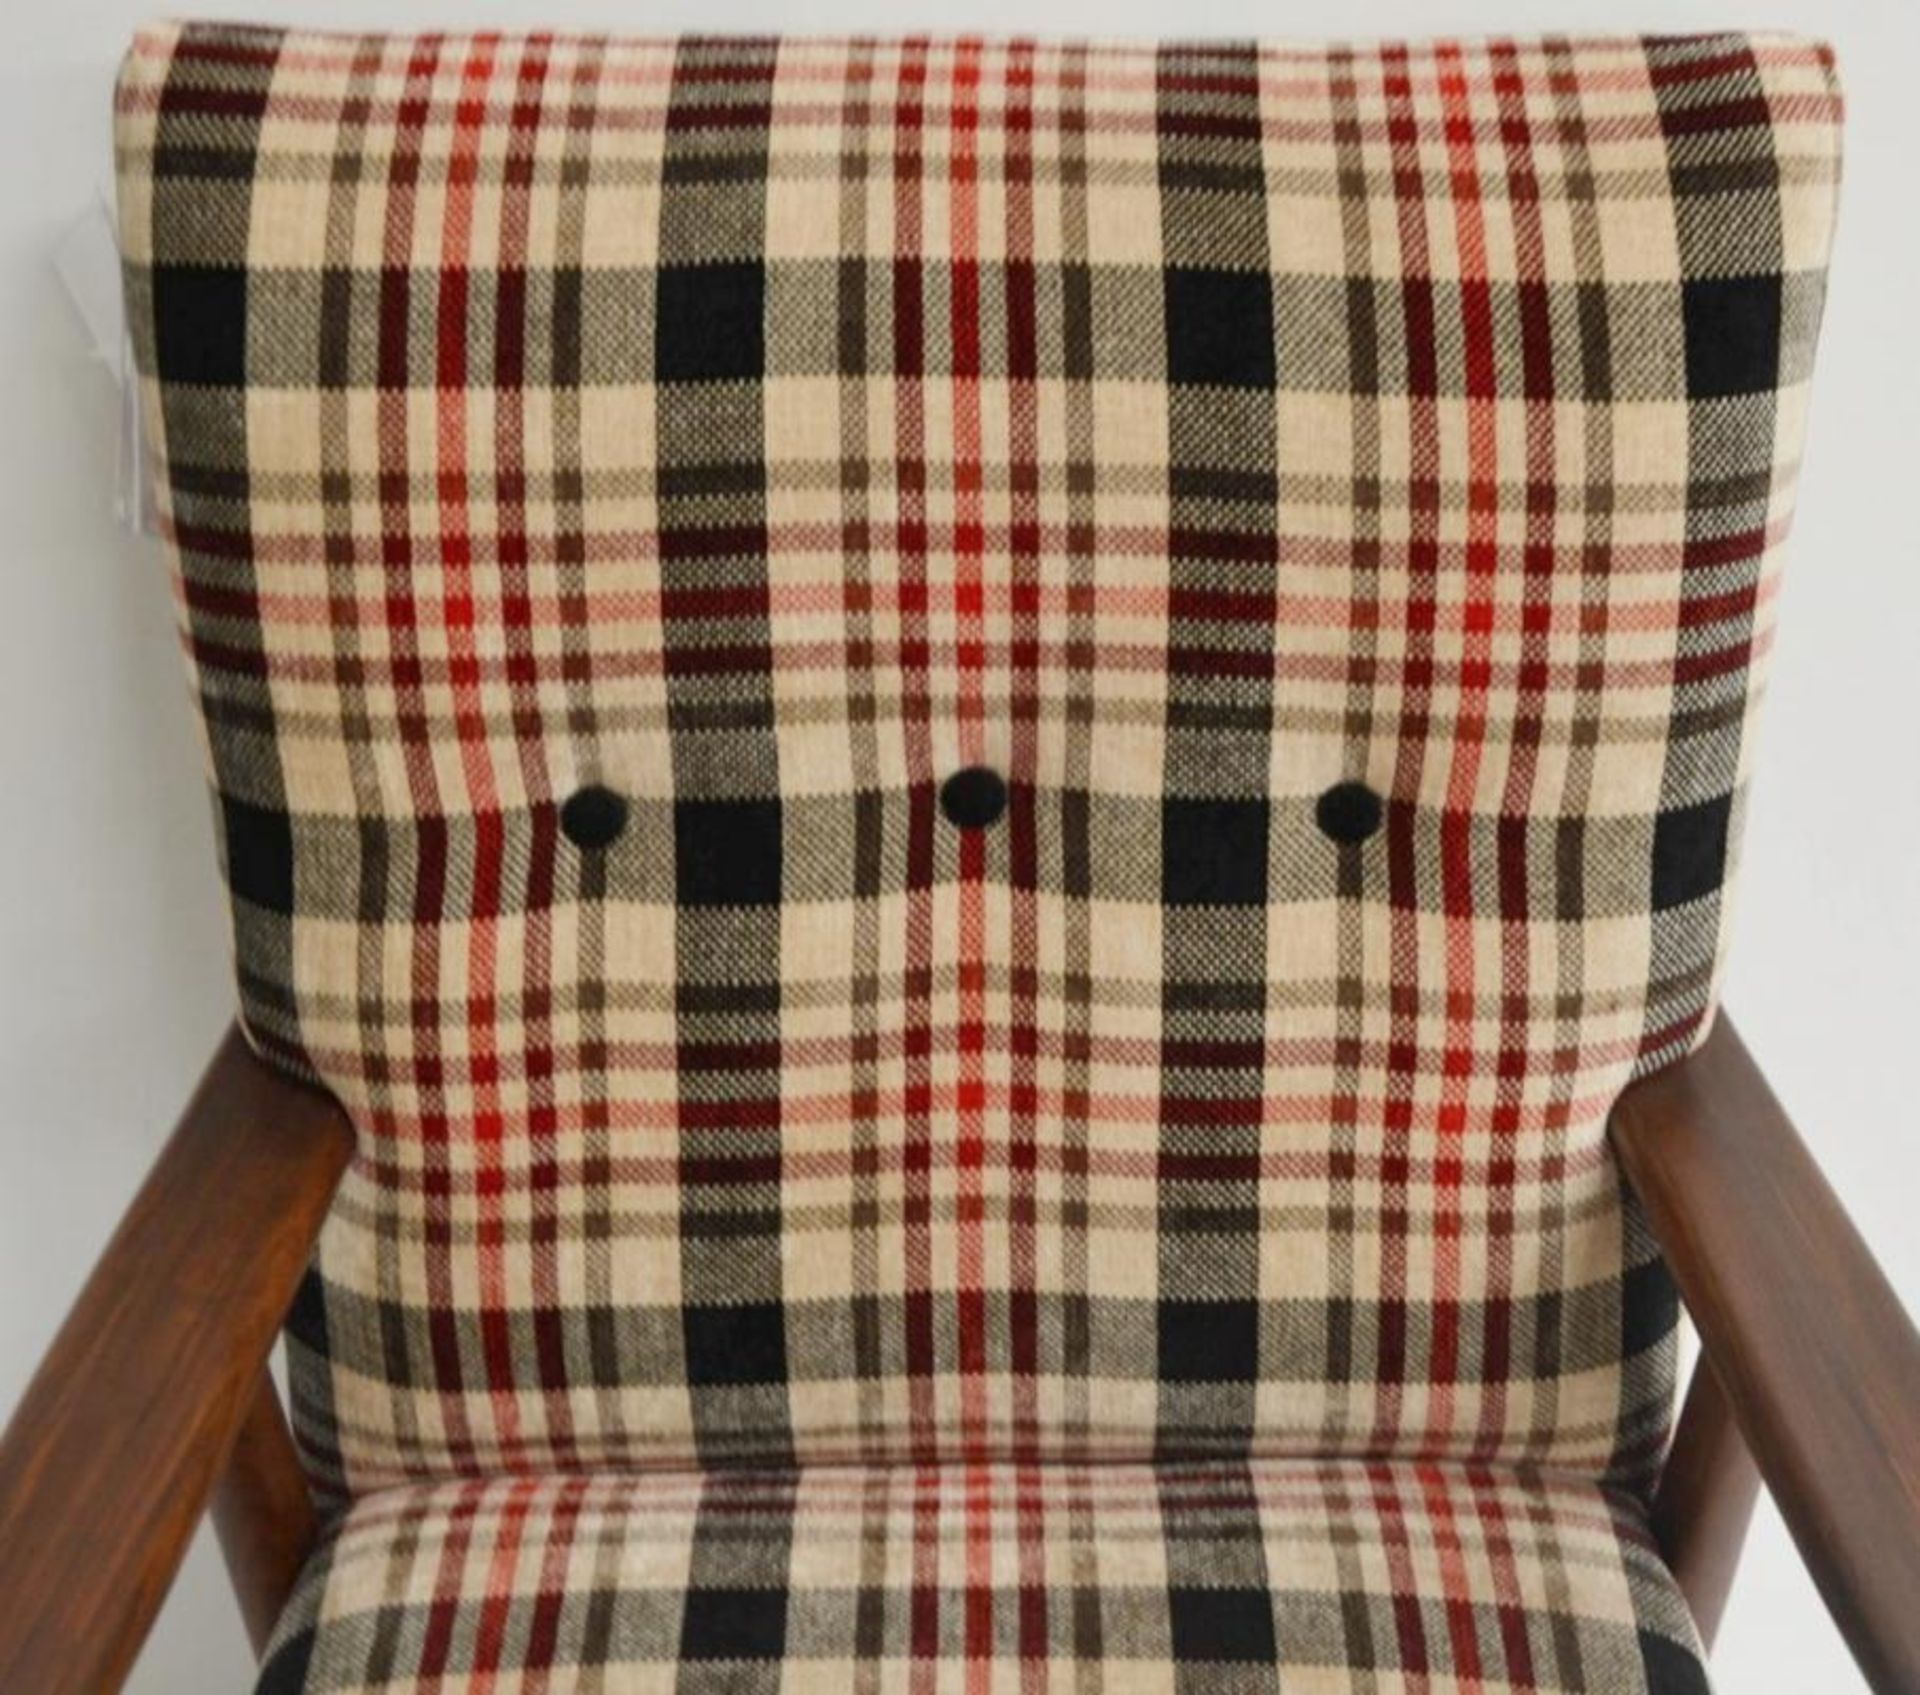 1 x JAB King Upholstery Mid Century Chair Upholstered In A 'Bourbon Pattern' - Dimensions (approx): - Image 2 of 9